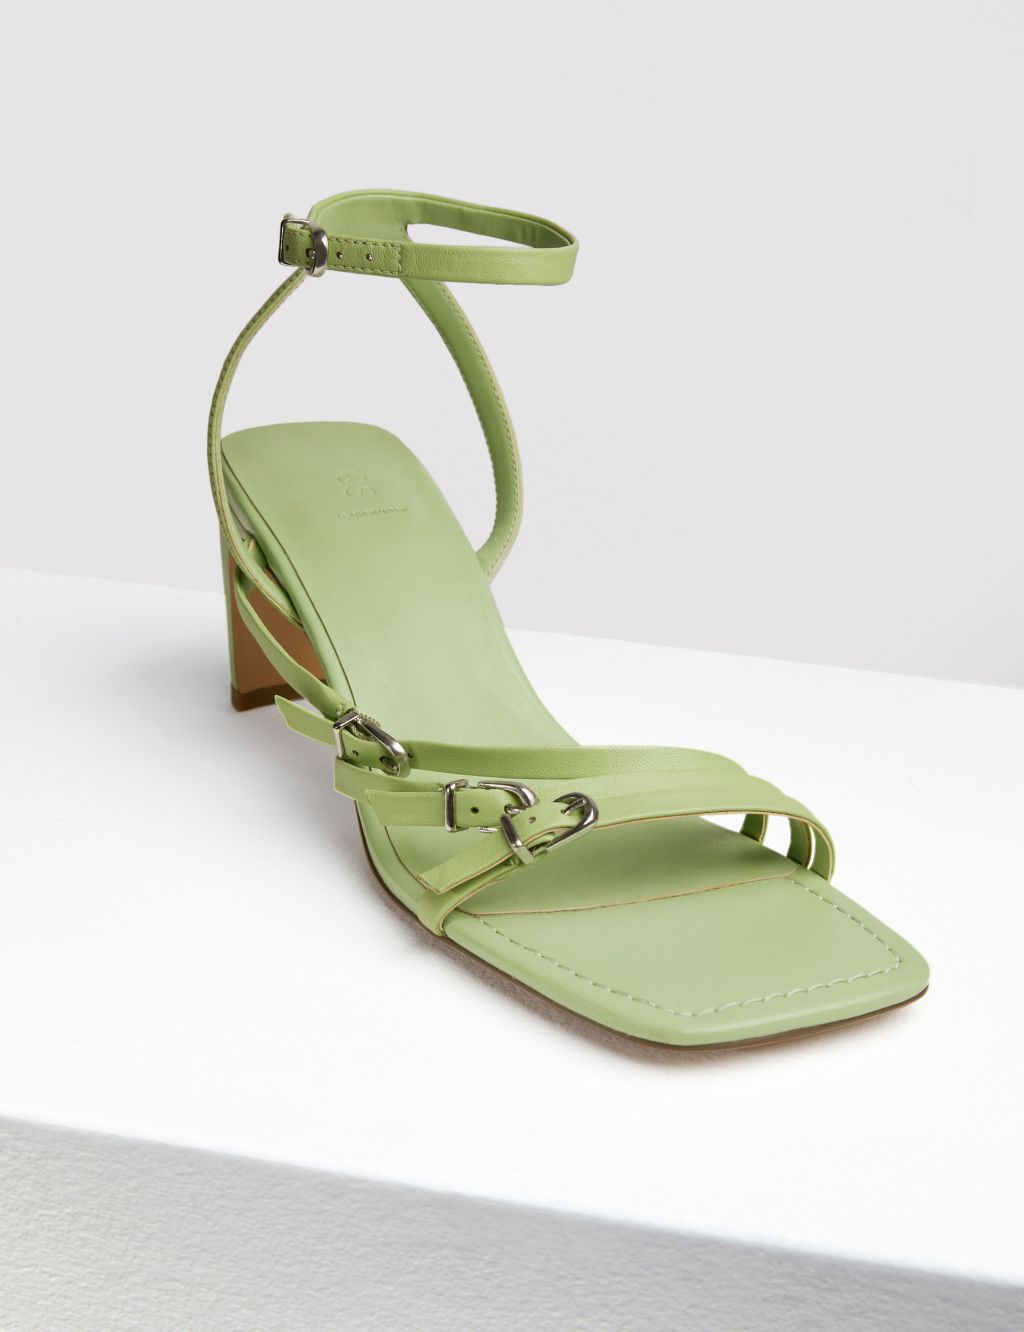 Leather Buckle Strappy Block Heel Sandals